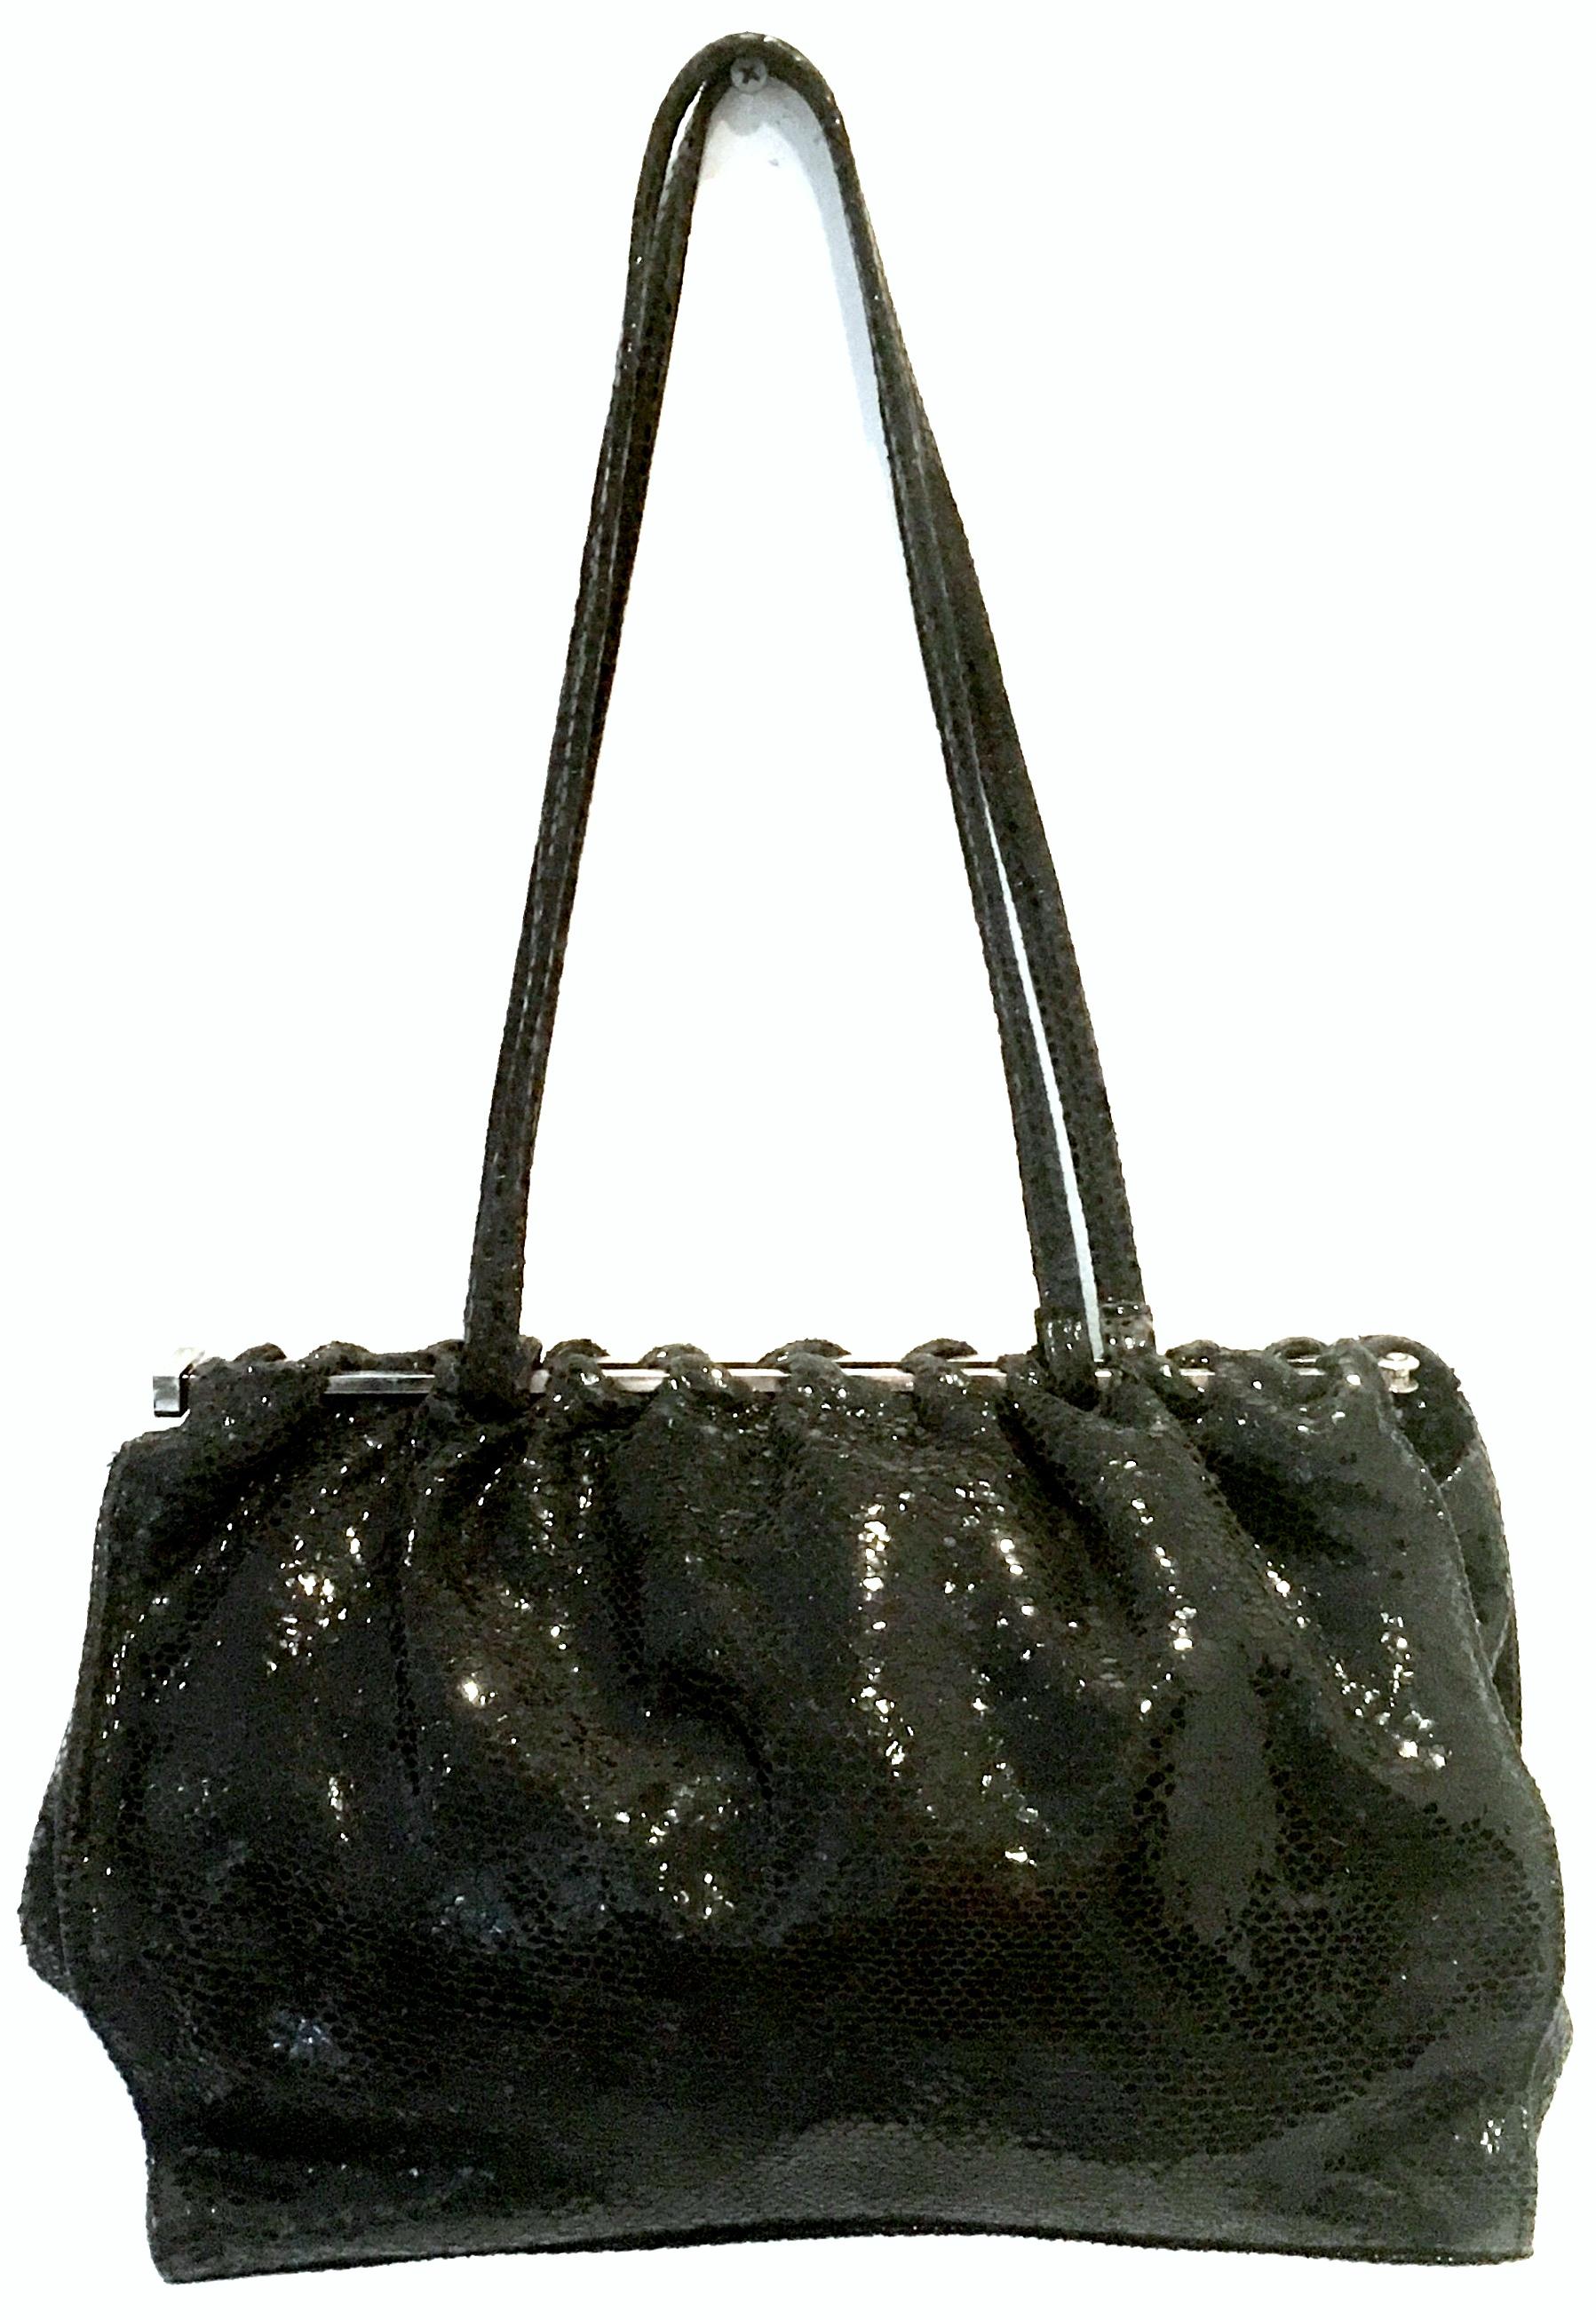 1990'S Italian Jet Black & Chrome Python Hand Bag By, Carla Mancini. This like new soft side python hand bag features jet black python with chrome hardware.Dual purpose, can be used as a clutch style or shoulder style hand bag. Double python